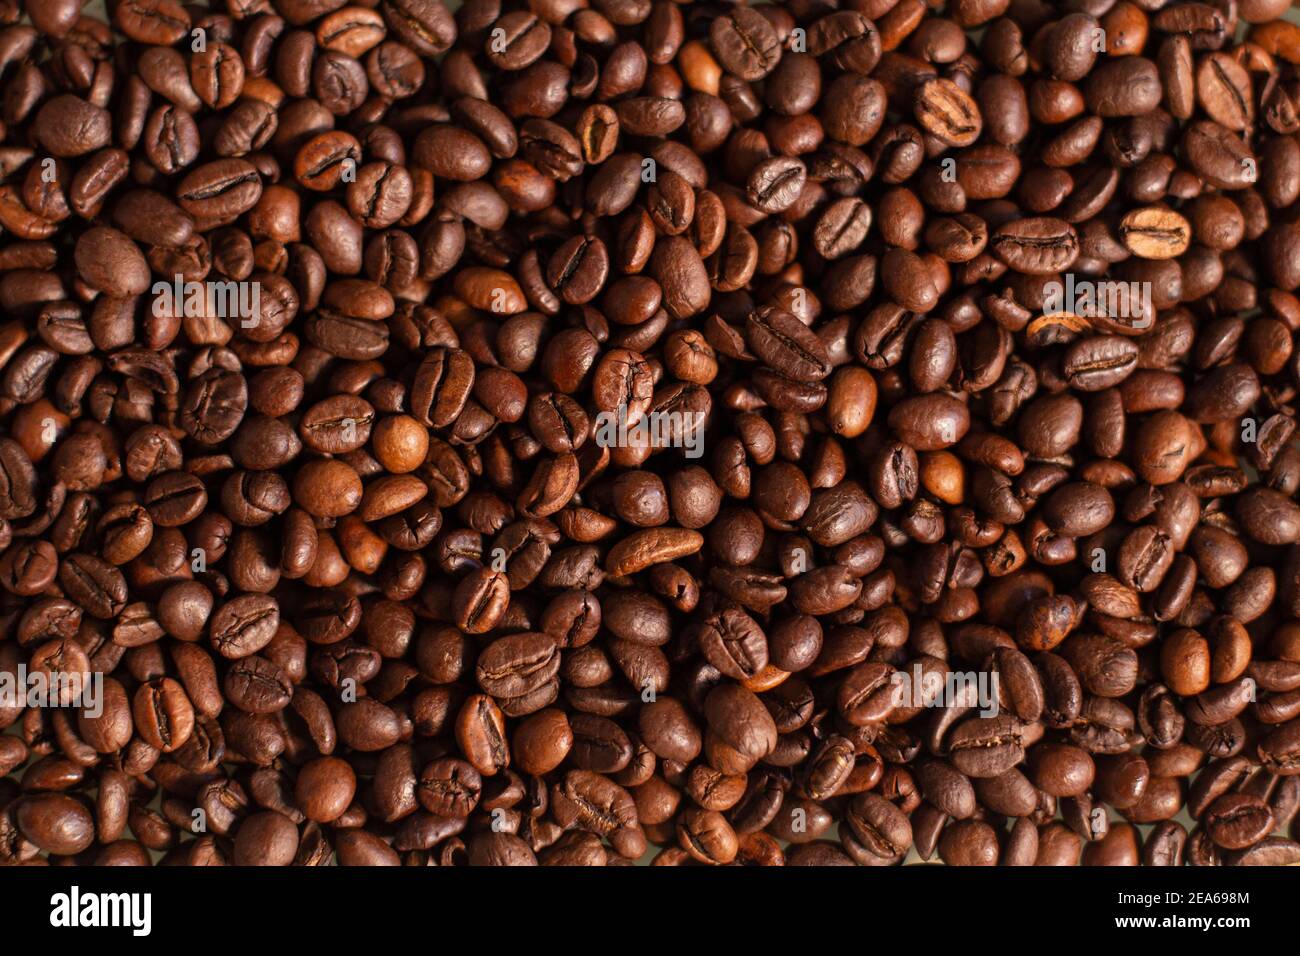 Fresh coffee grains wallpaper. Background of the roasted coffee beans. Good morning. Coffee shop. Stock Photo